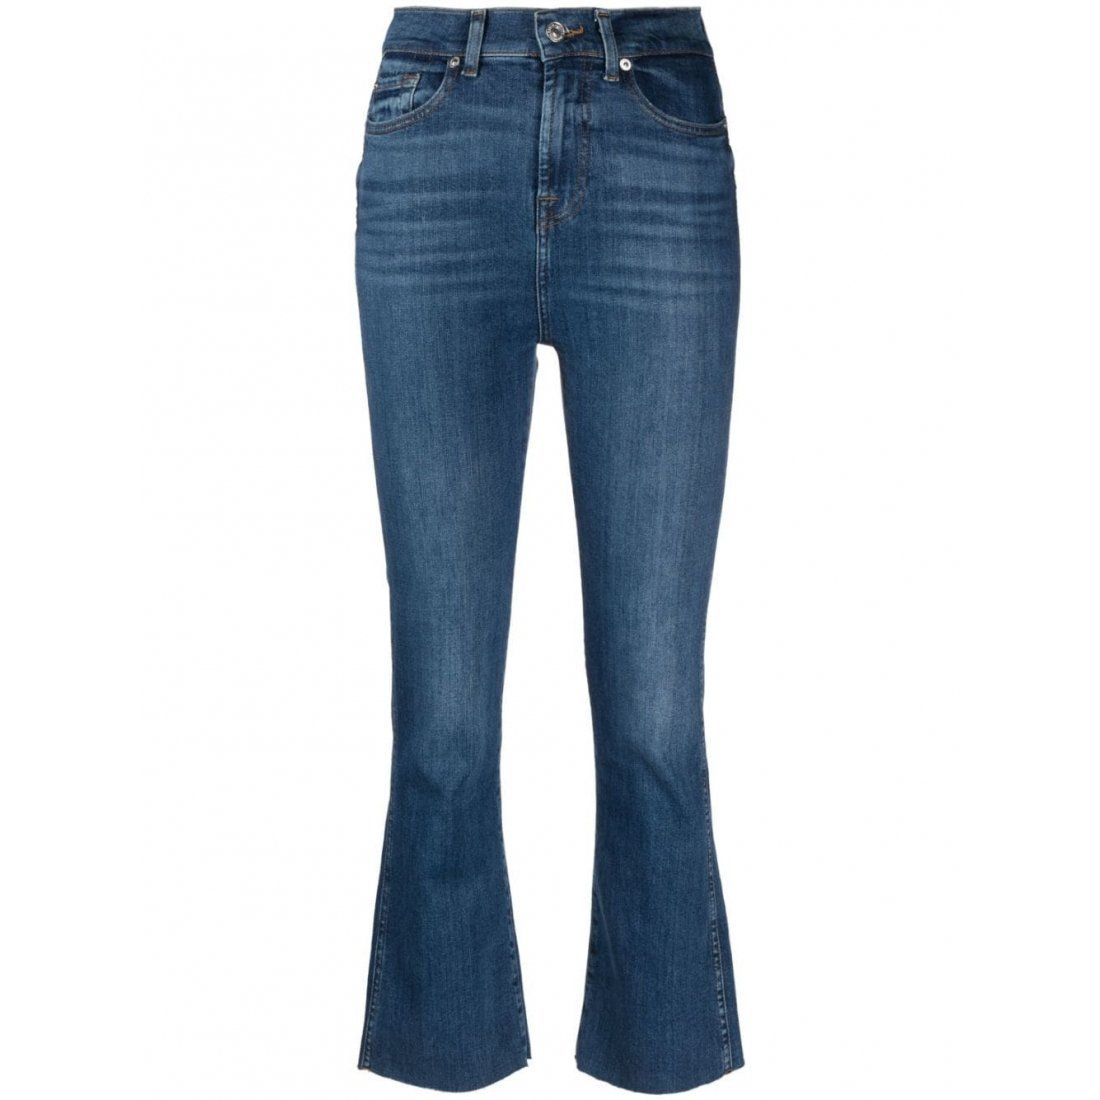 7 For All Mankind - Jeans pour Femmes